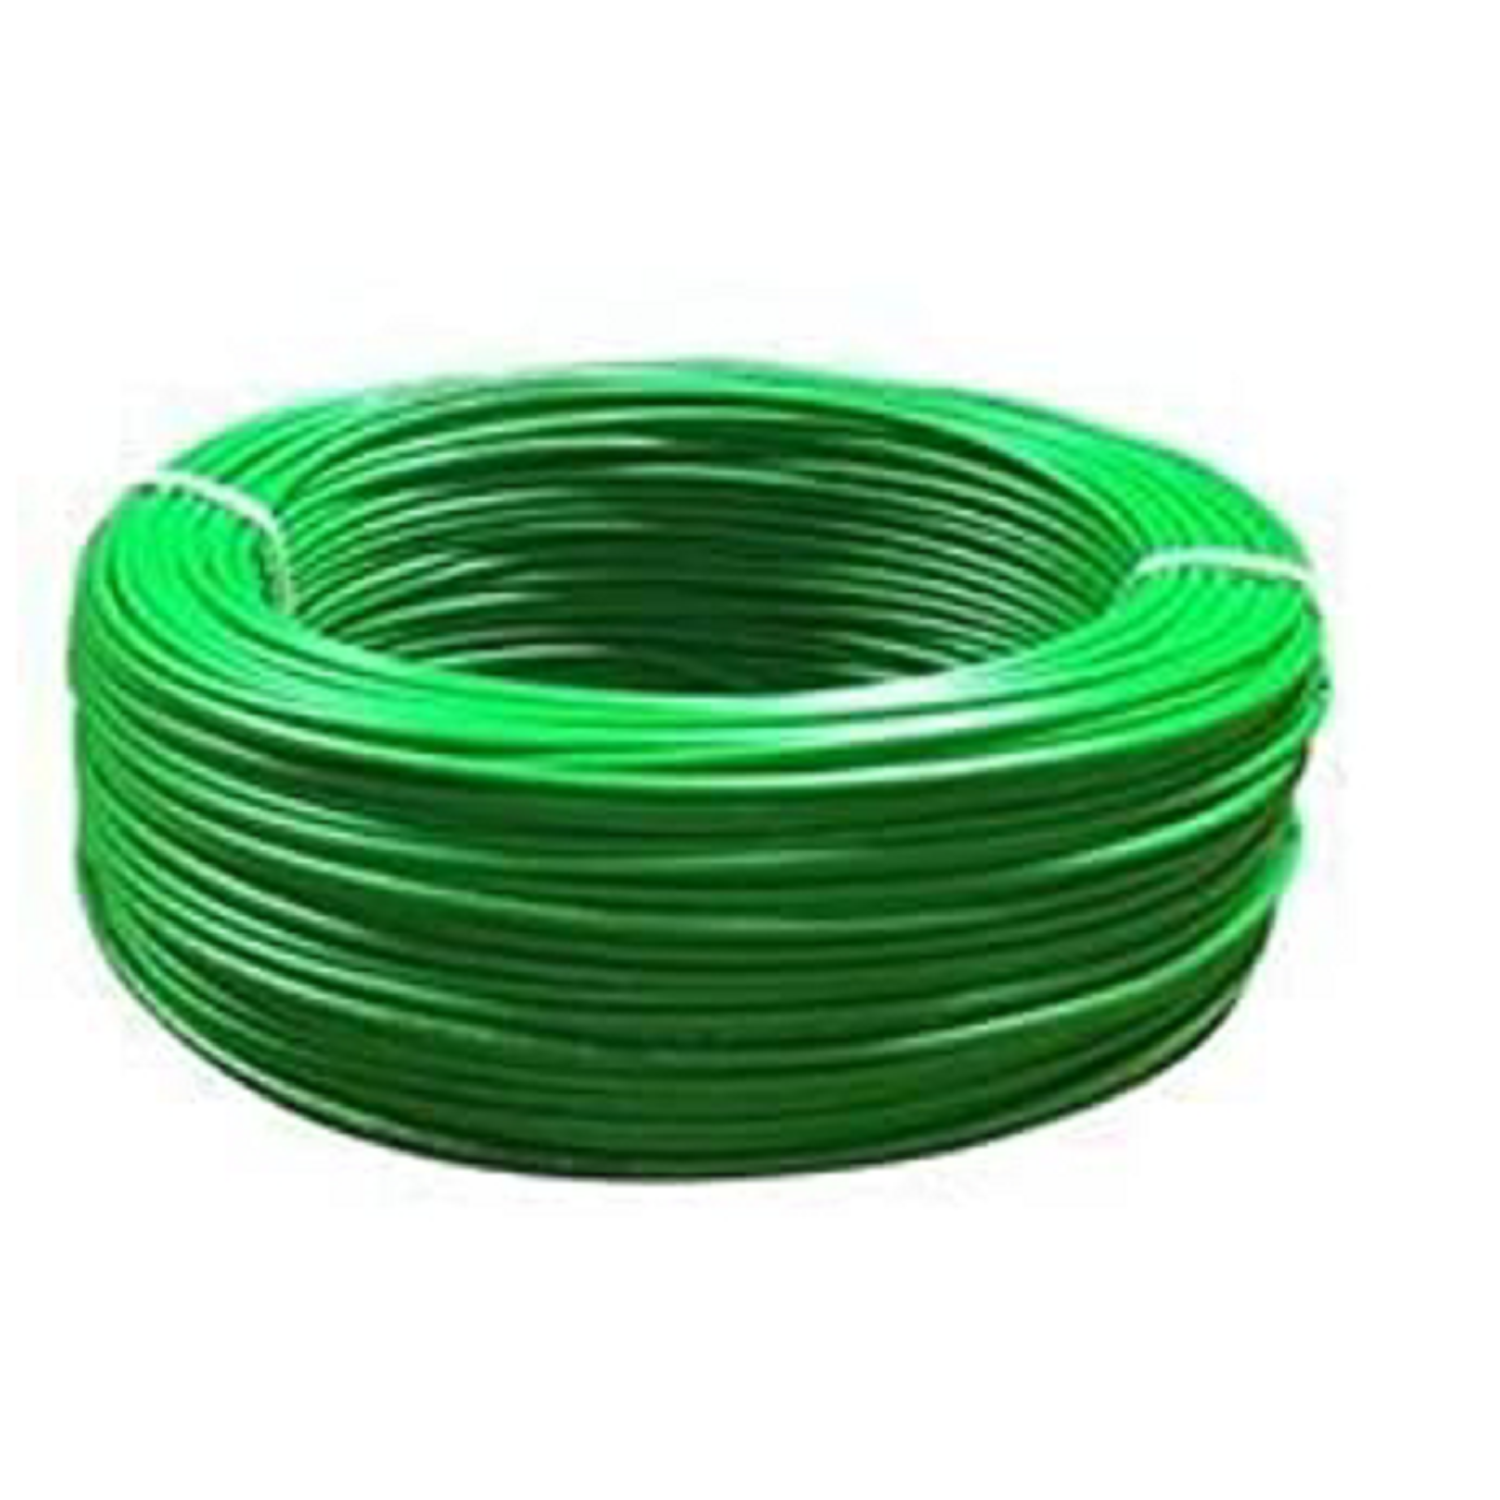 Polycab FR-LS 1.5 SQ-MM, (300 Meters) PVC Insulated Copper Wire Single Core (Green)